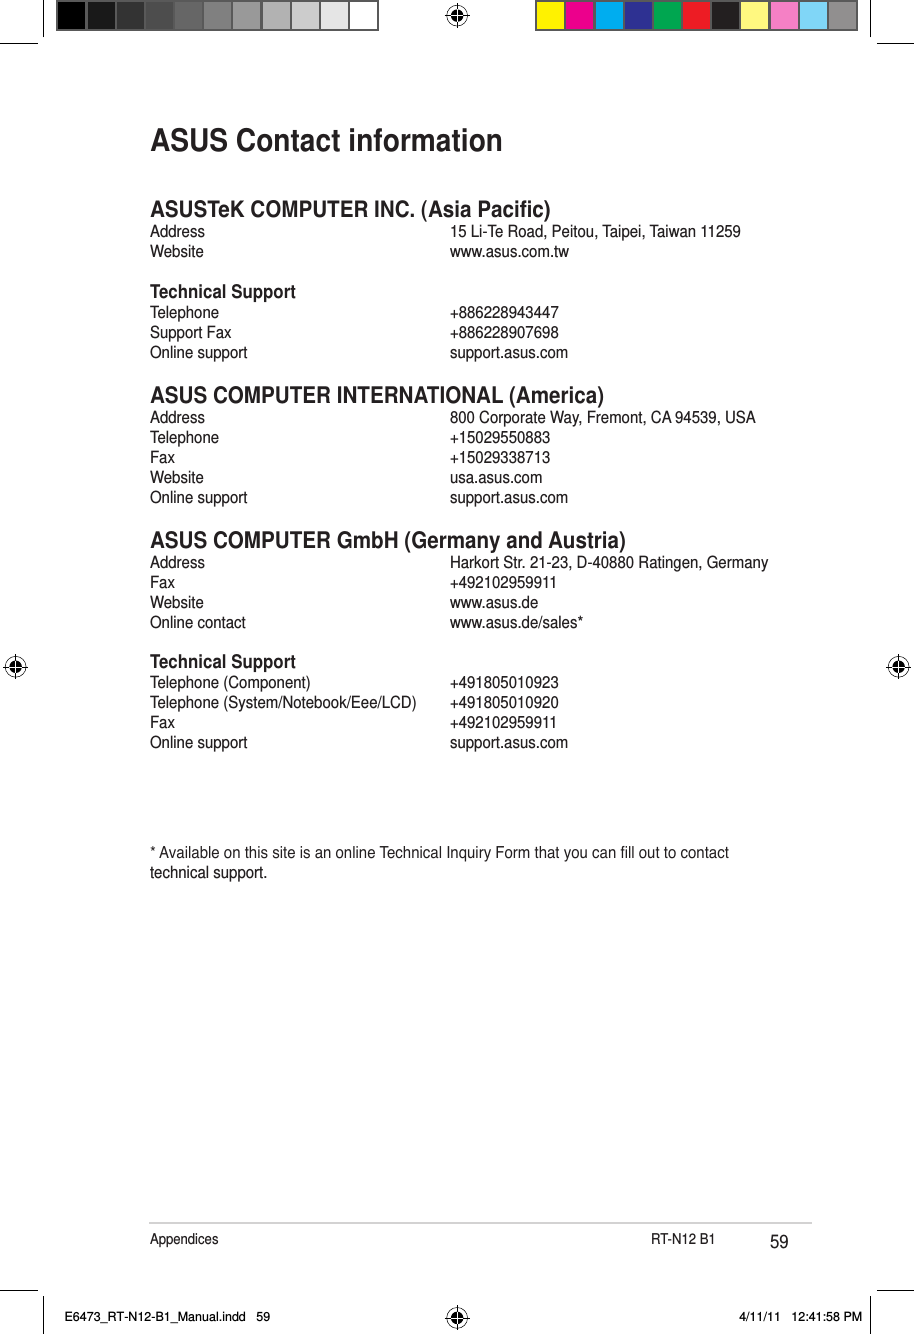 59Appendices                              RT-N12 B1ASUSTeK COMPUTER INC. (Asia Pacic)Address      15 Li-Te Road, Peitou, Taipei, Taiwan 11259Website      www.asus.com.twTechnical SupportTelephone      +886228943447Support Fax      +886228907698Online support      support.asus.comASUS COMPUTER INTERNATIONAL (America)Address      800 Corporate Way, Fremont, CA 94539, USATelephone      +15029550883Fax        +15029338713Website      usa.asus.comOnline support      support.asus.comASUS COMPUTER GmbH (Germany and Austria)Address      Harkort Str. 21-23, D-40880 Ratingen, GermanyFax        +492102959911Website      www.asus.deOnline contact      www.asus.de/sales*Technical SupportTelephone (Component)      +491805010923Telephone (System/Notebook/Eee/LCD)  +491805010920Fax        +492102959911Online support      support.asus.com* Available on this site is an online Technical Inquiry Form that you can ll out to contact technical support.ASUS Contact informationE6473_RT-N12-B1_Manual.indd   59 4/11/11   12:41:58 PM